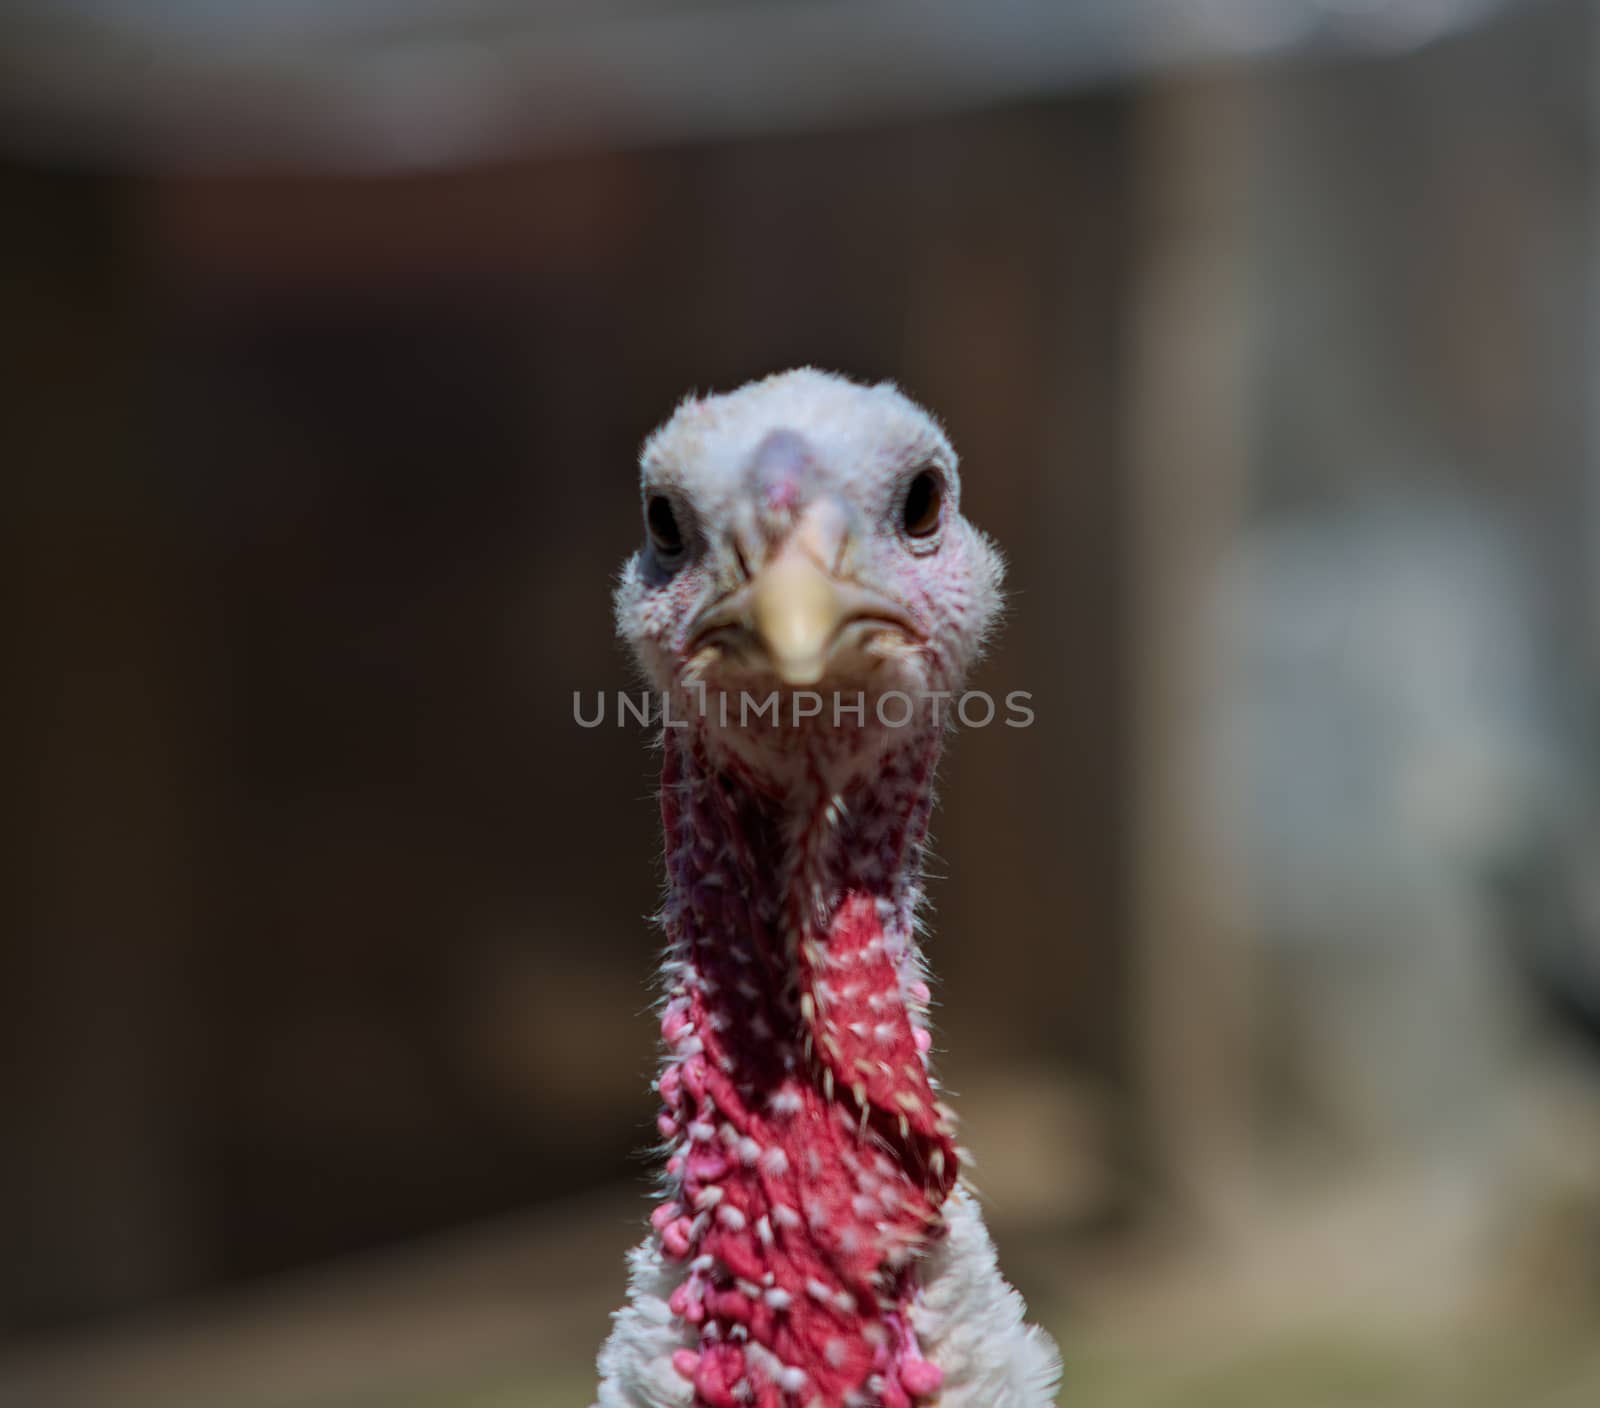 Front view of turkey head looking at camera